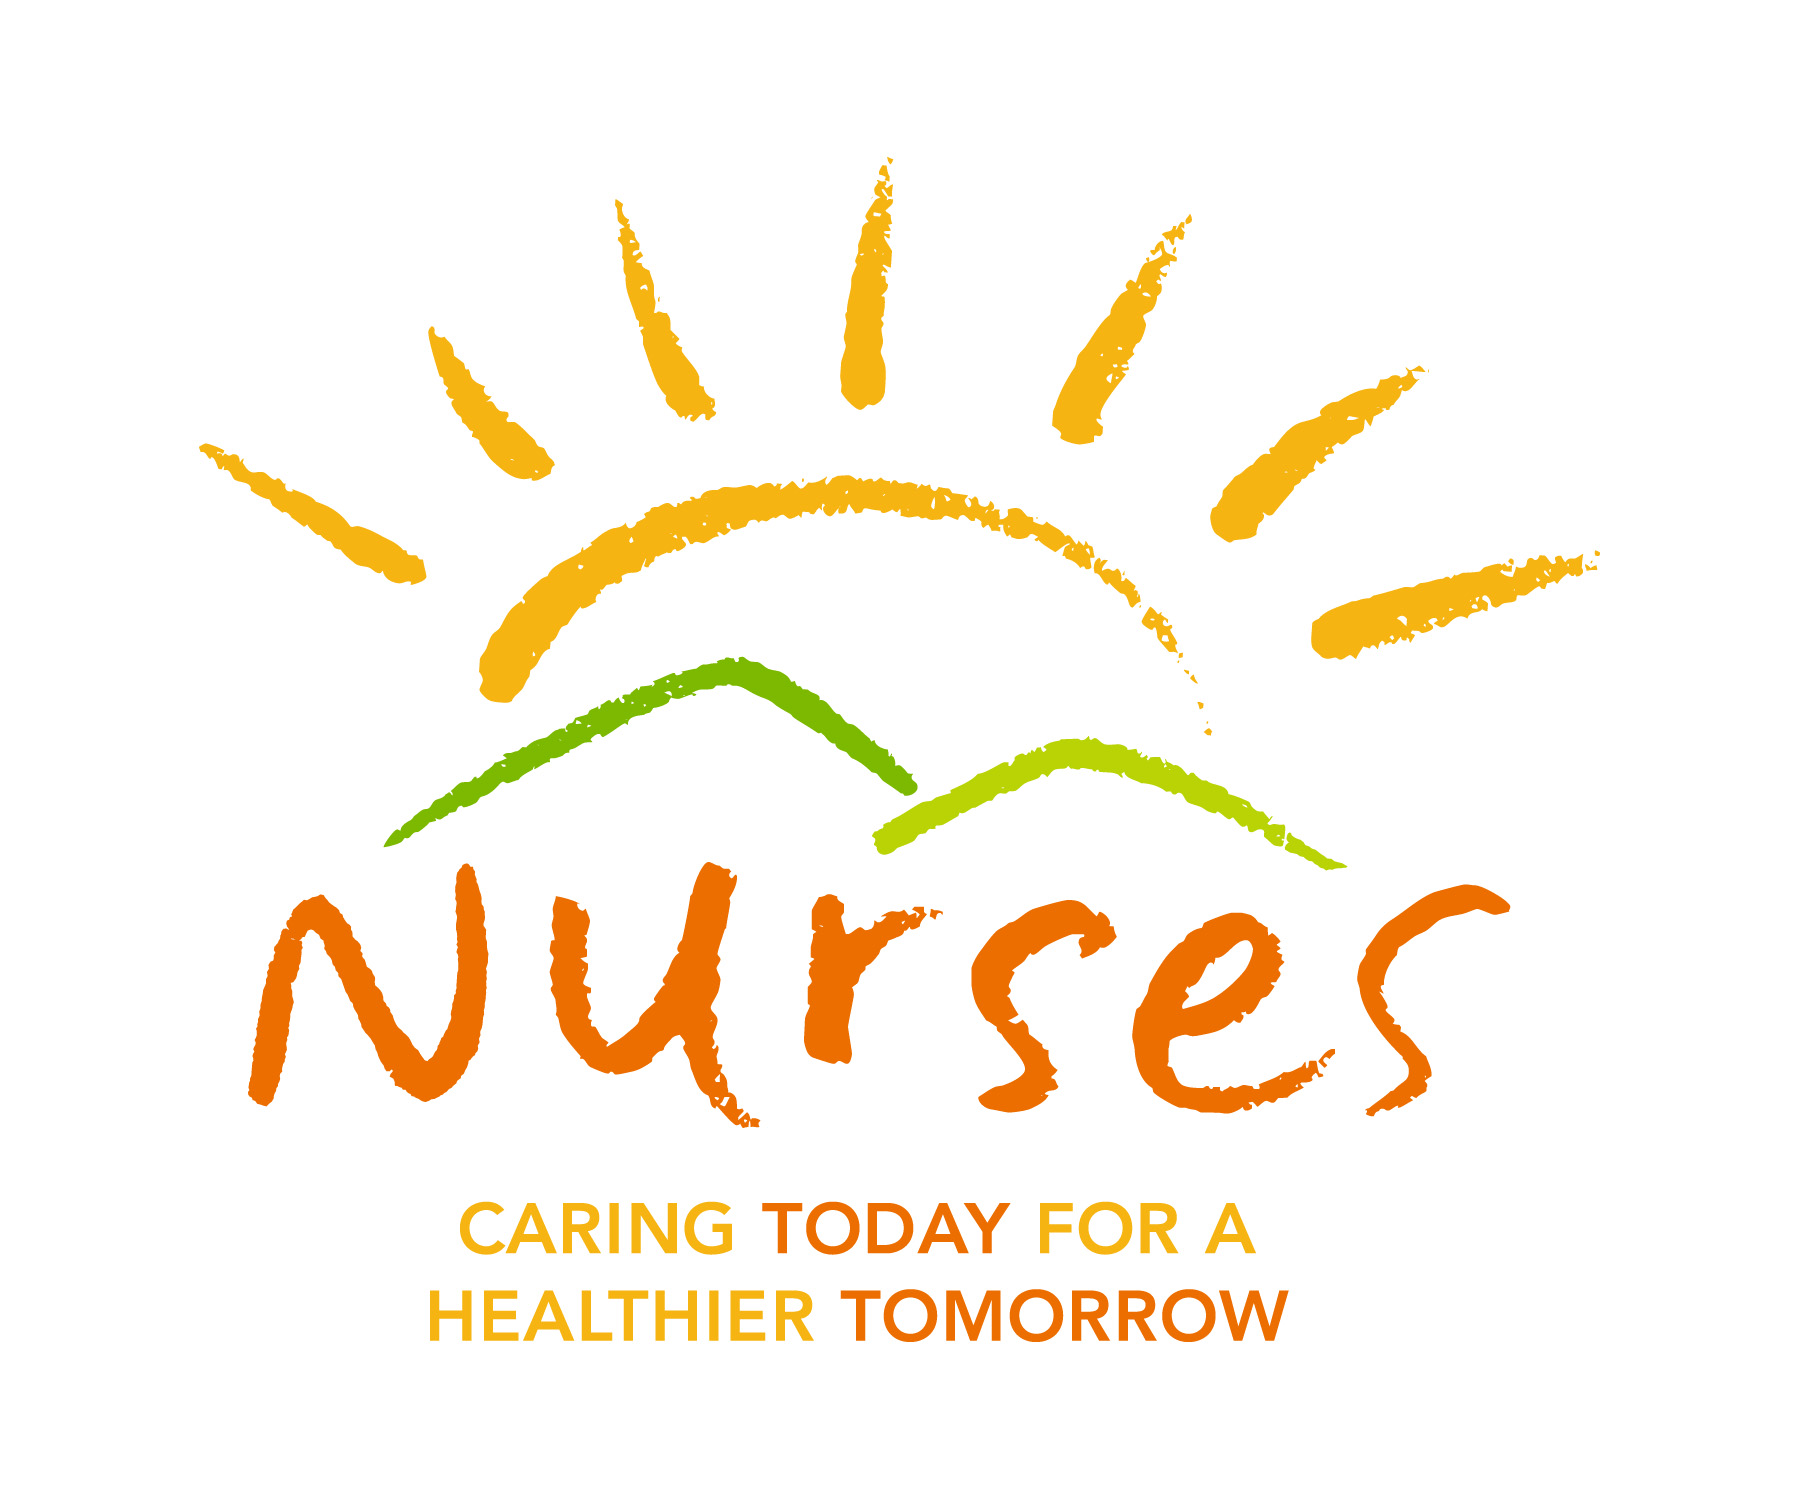 It S National Nurses Week And Like Many Others This Week We Re    